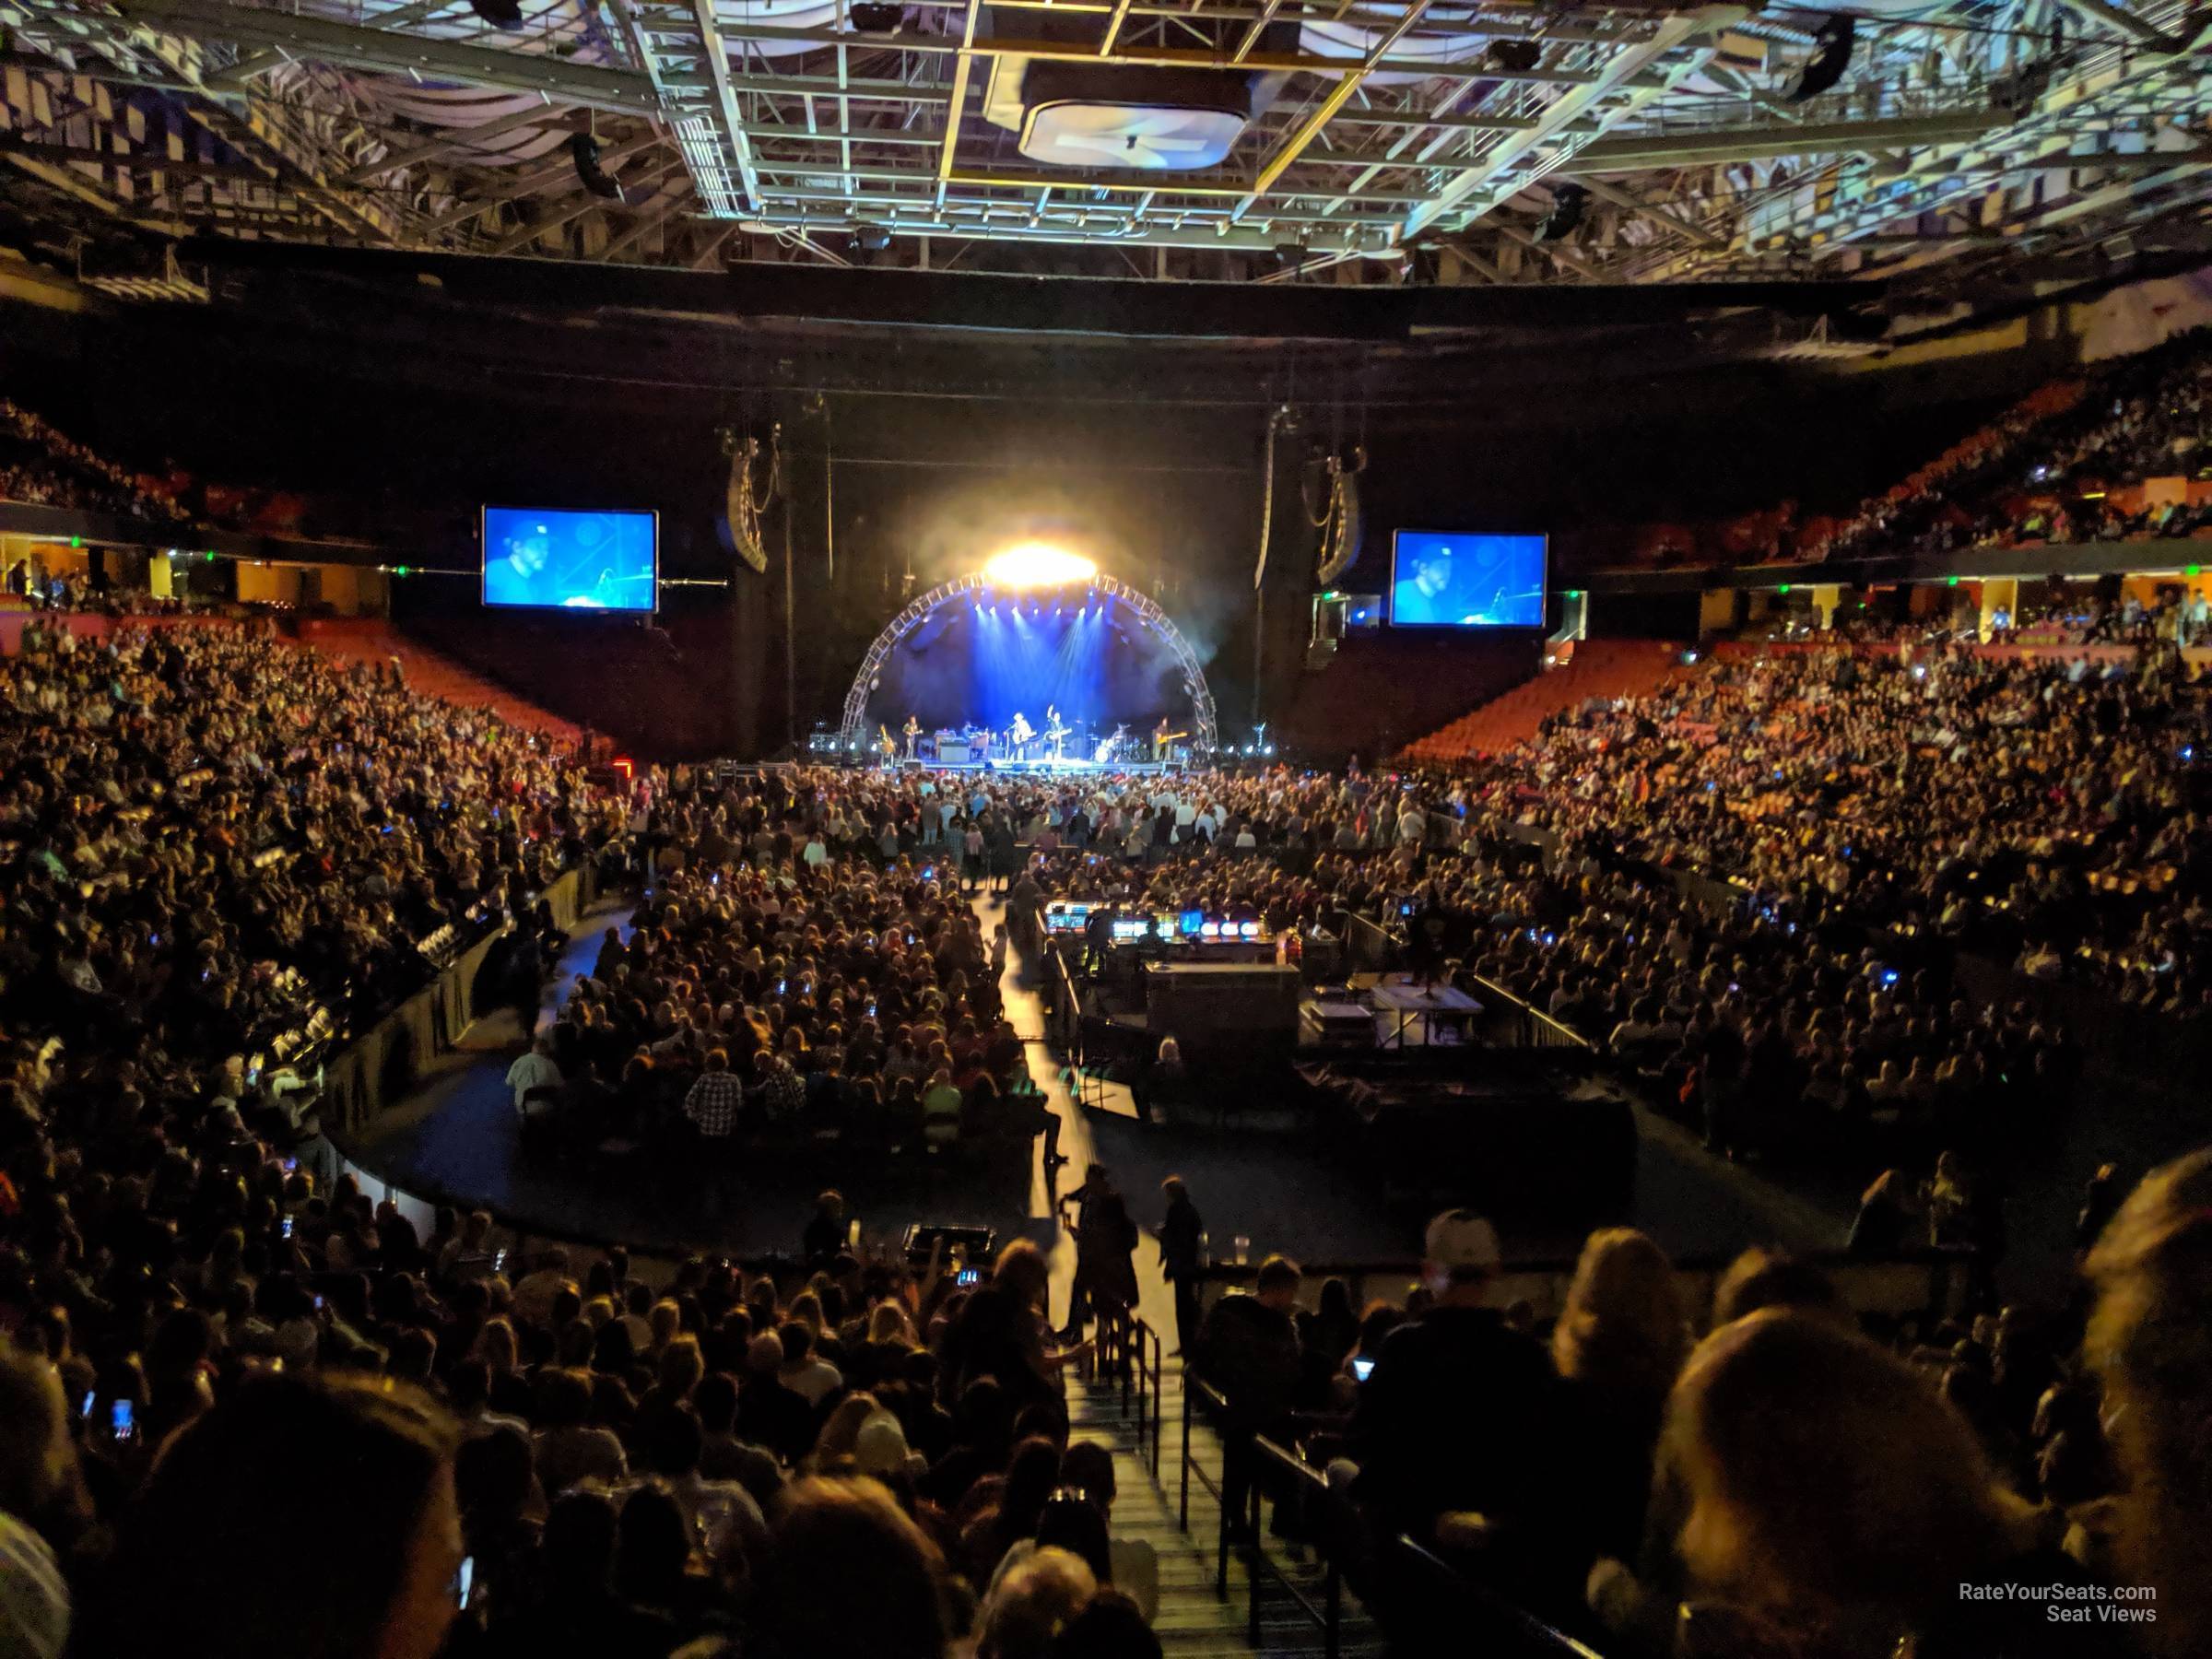 Section 118 at Bon Secours Wellness Arena for Concerts